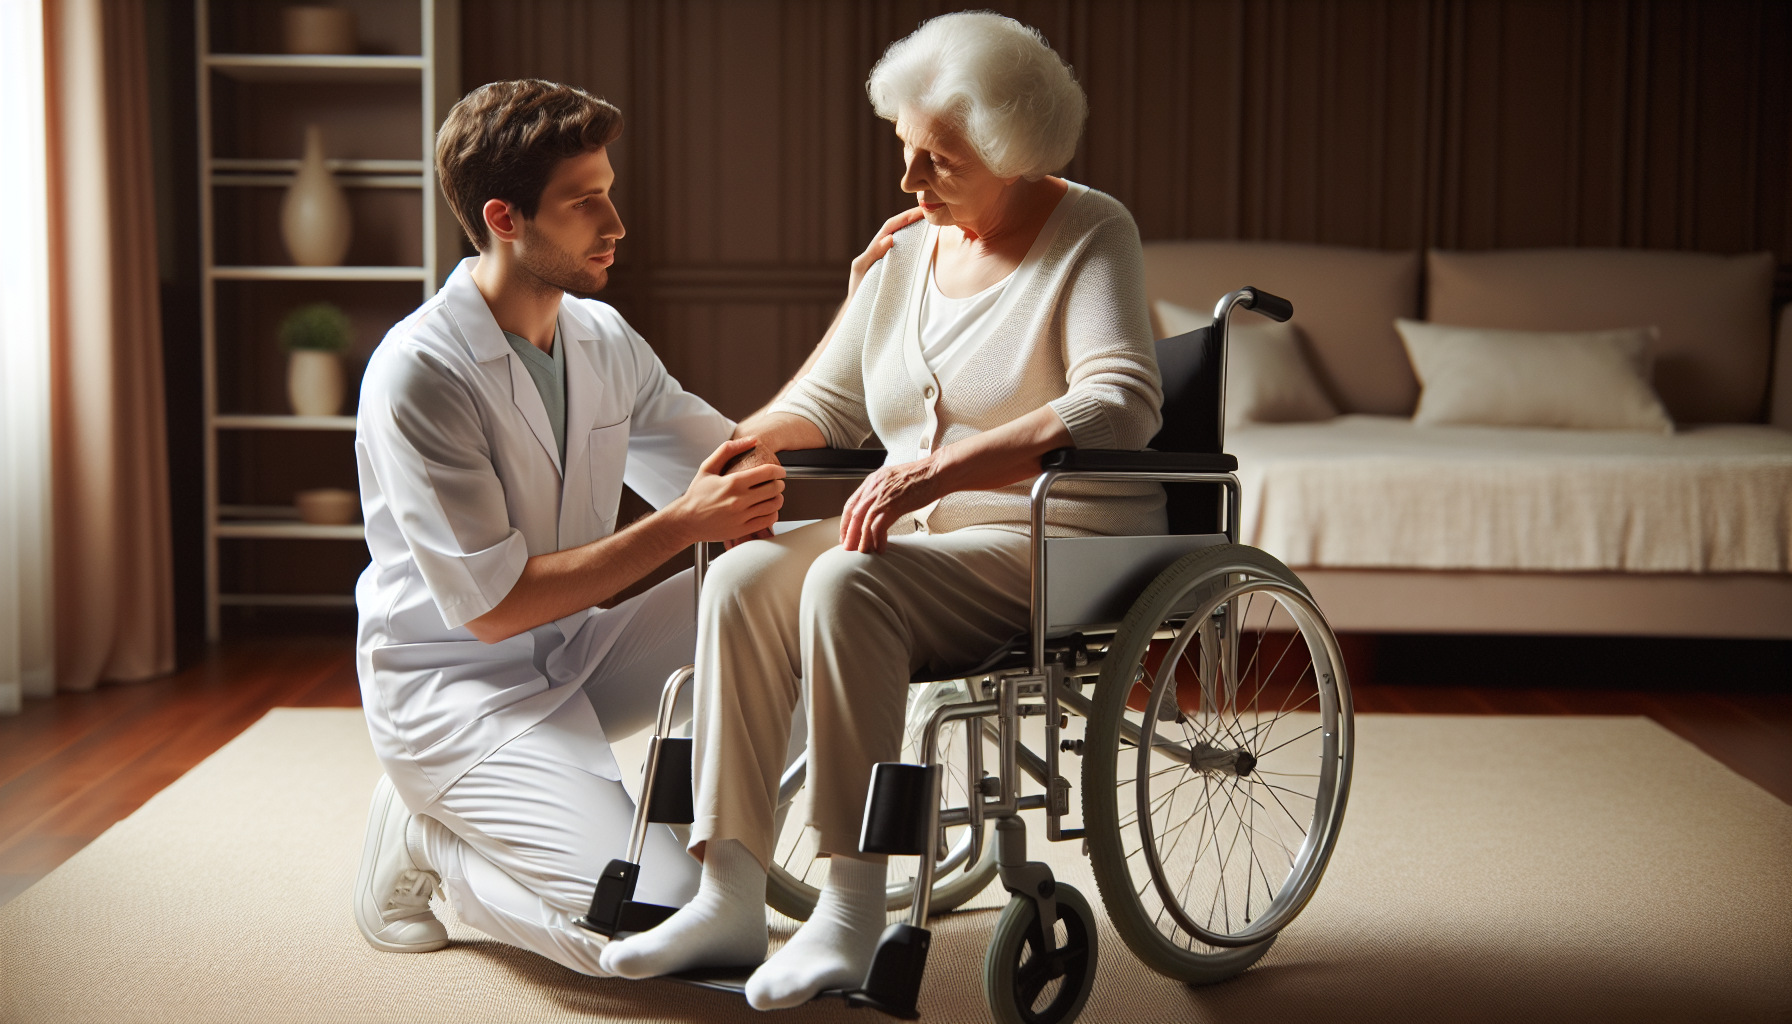 A patient care technician assisting a senior patient with daily tasks